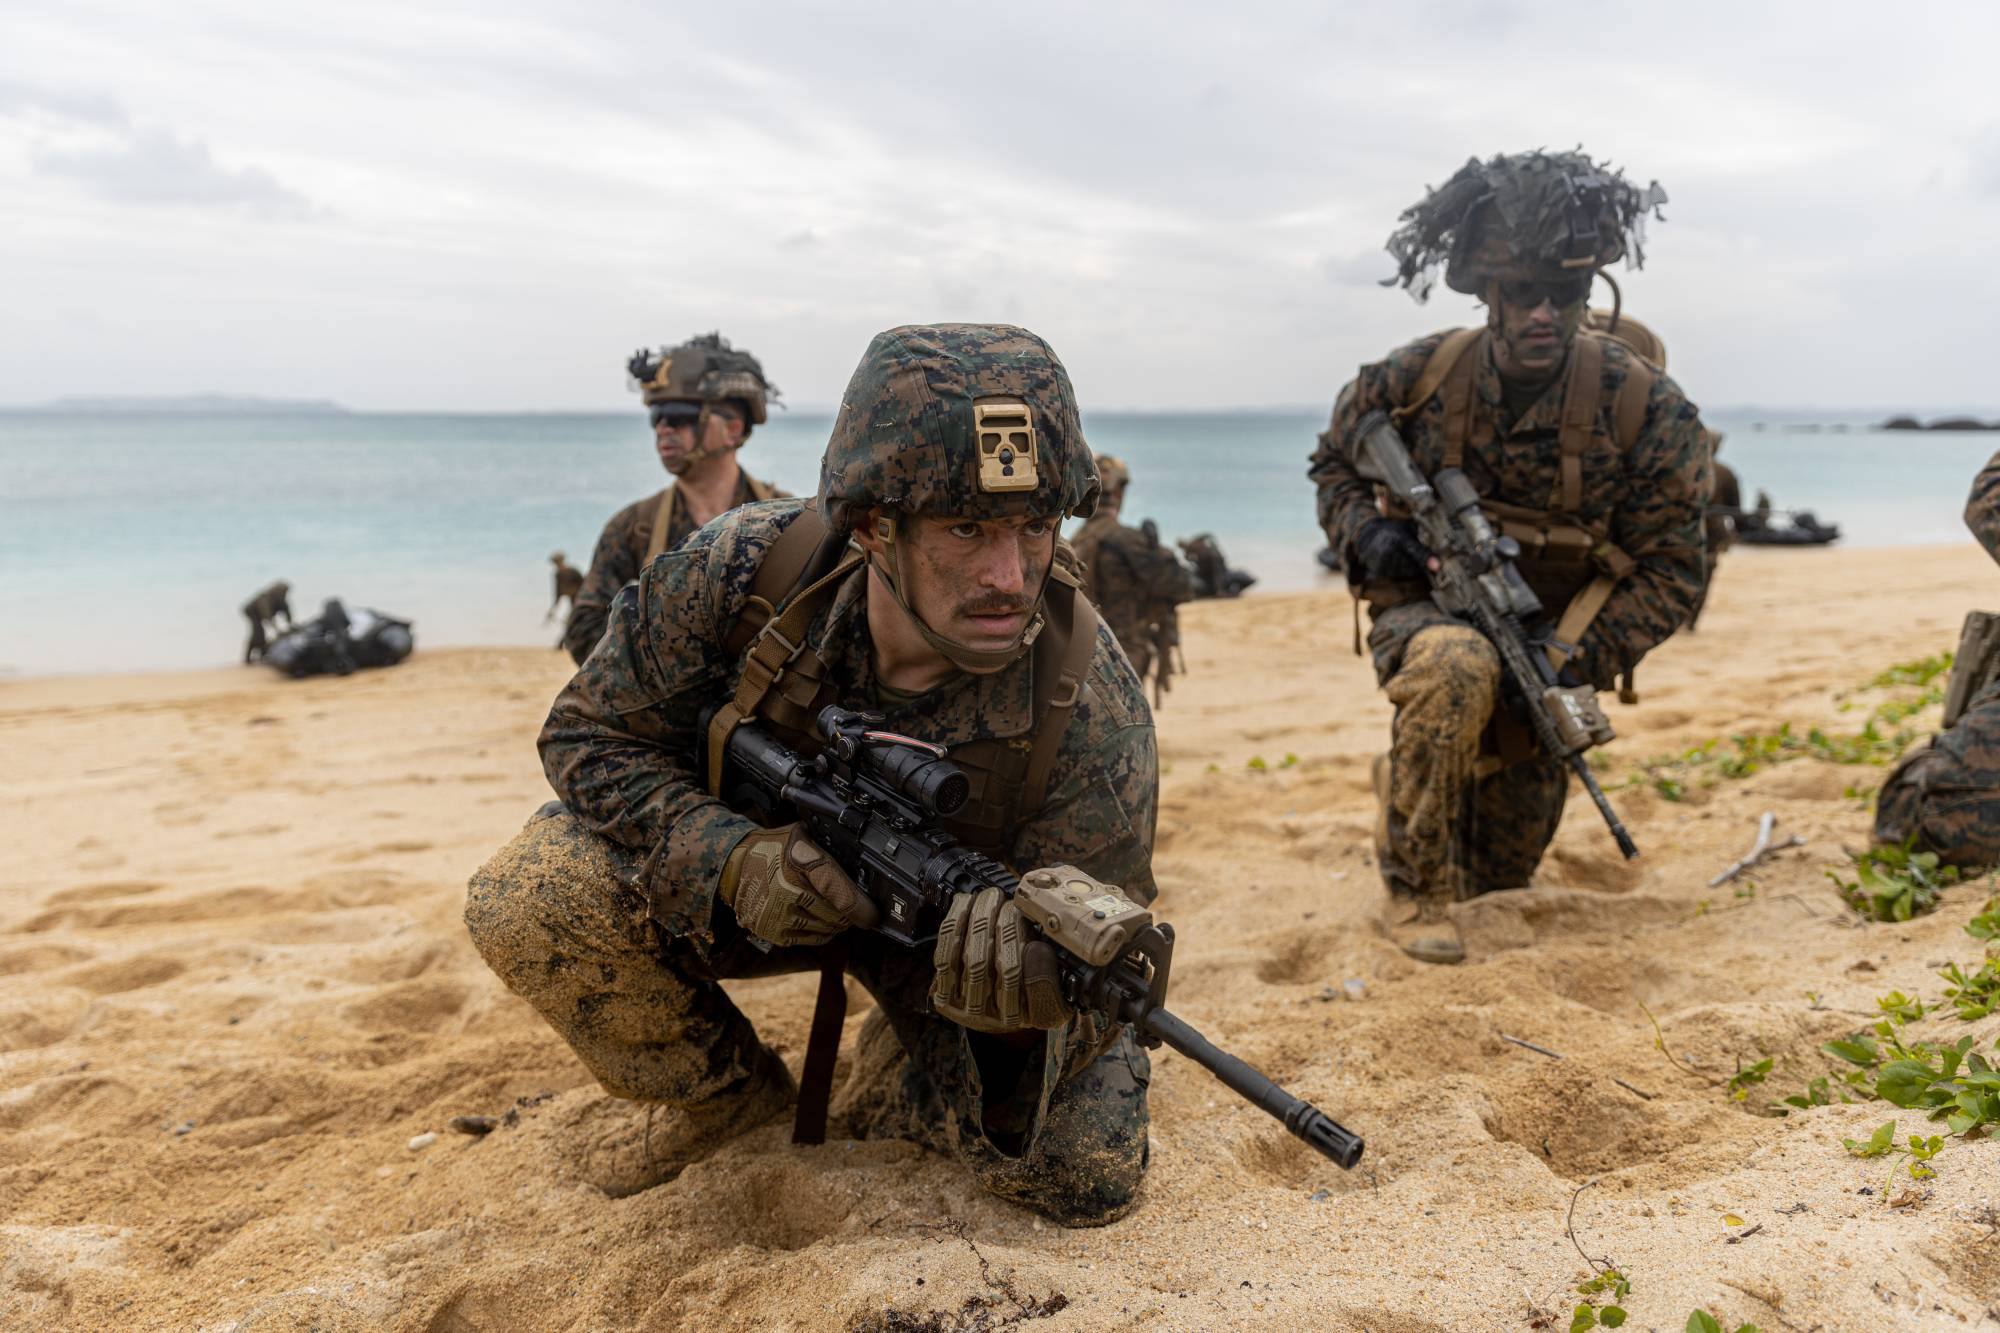 U.S. Marines with the 31st Marine Expeditionary Unit provide security during a boat raid exercise at Camp Schwab, in Okinawa Prefecture, on Dec. 14. | U.S. MARINE CORPS.